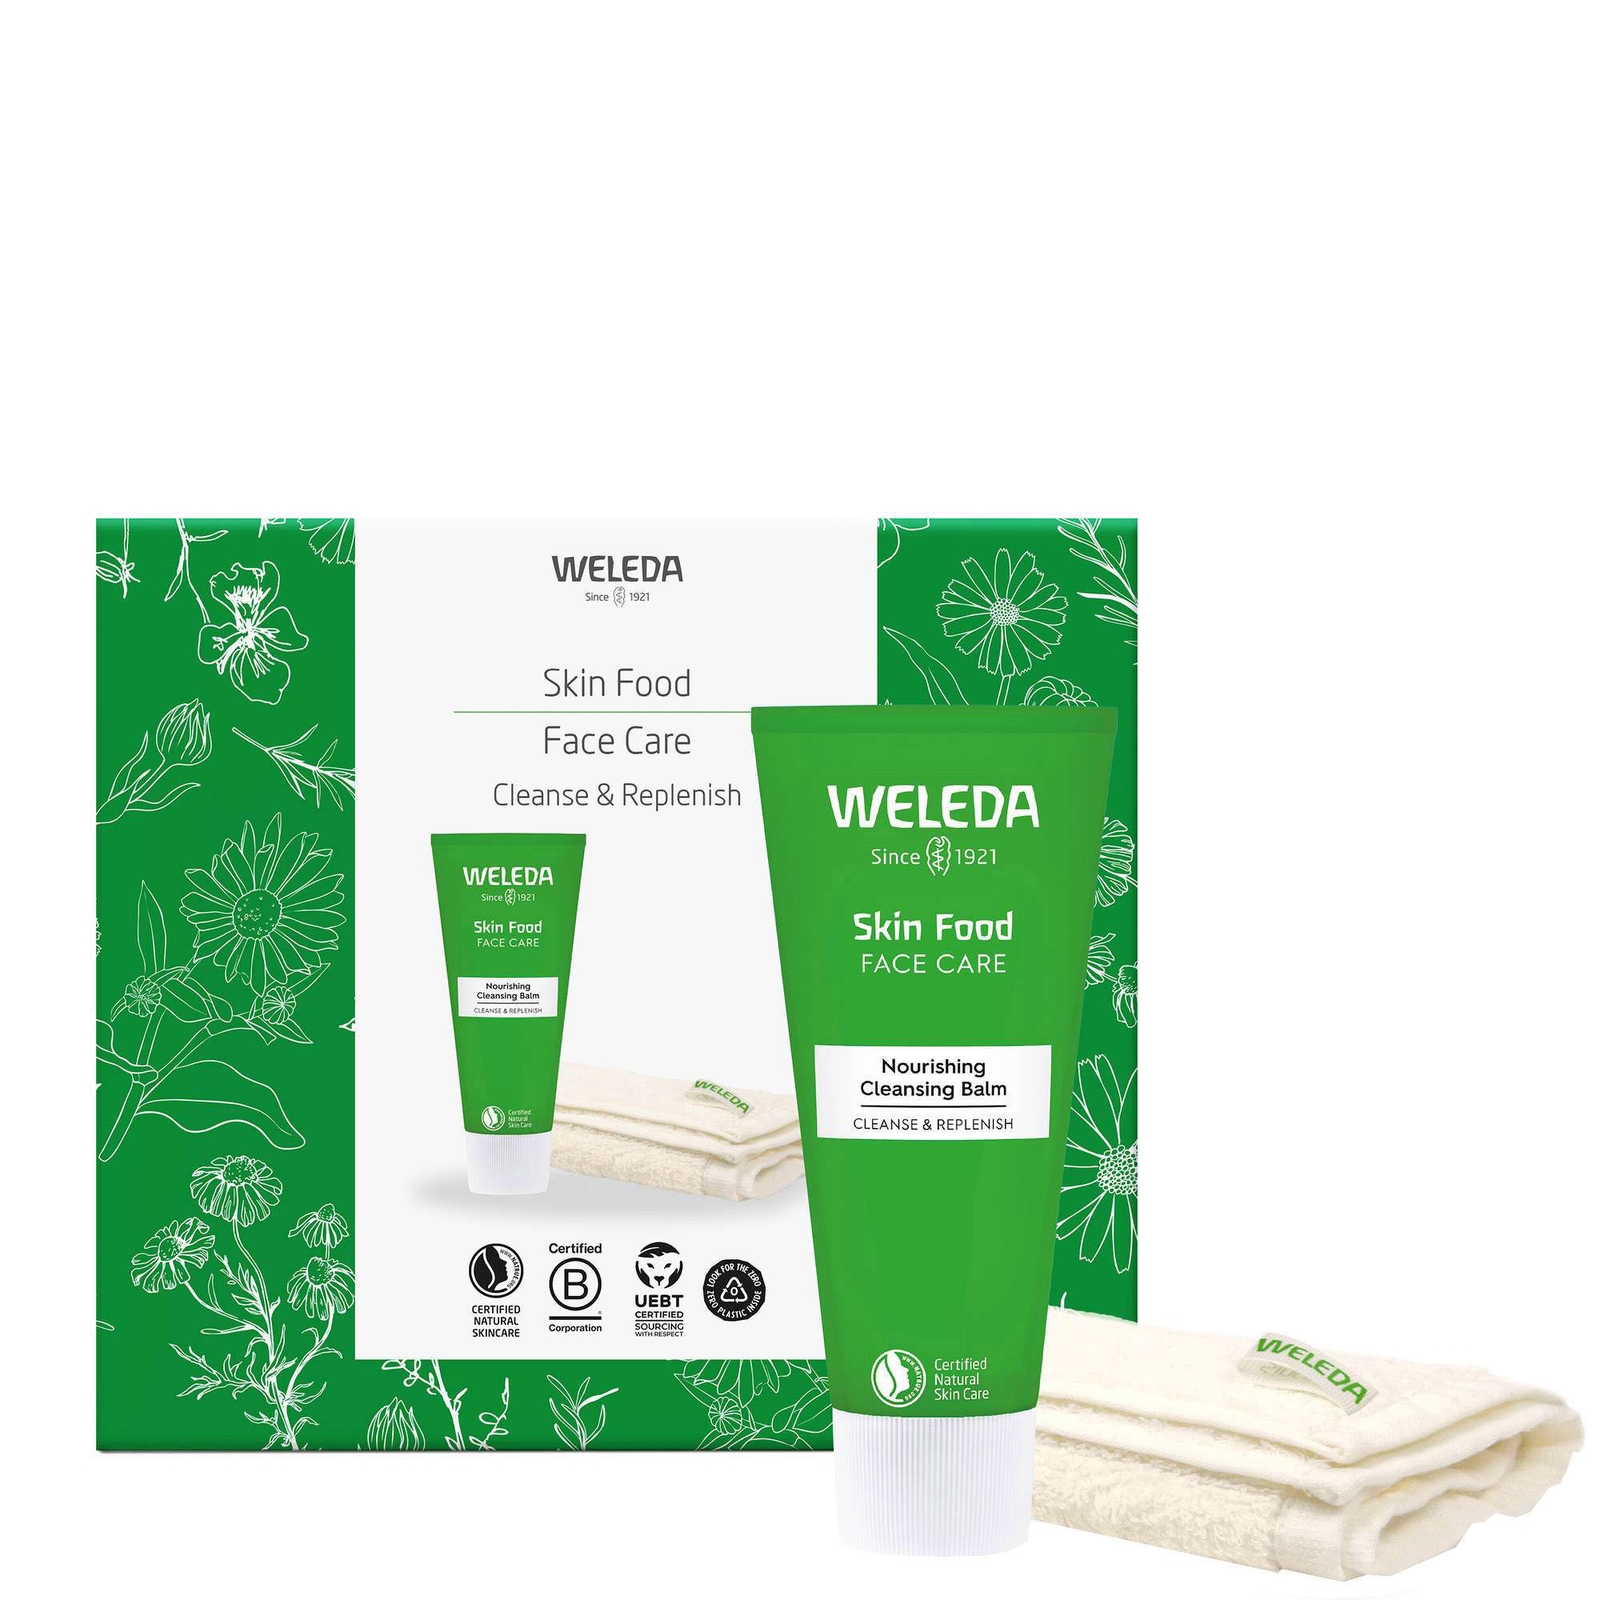 Weleda Gift And Sets Skin Food Cleanse & Replenish Face Care Gift Set In Green